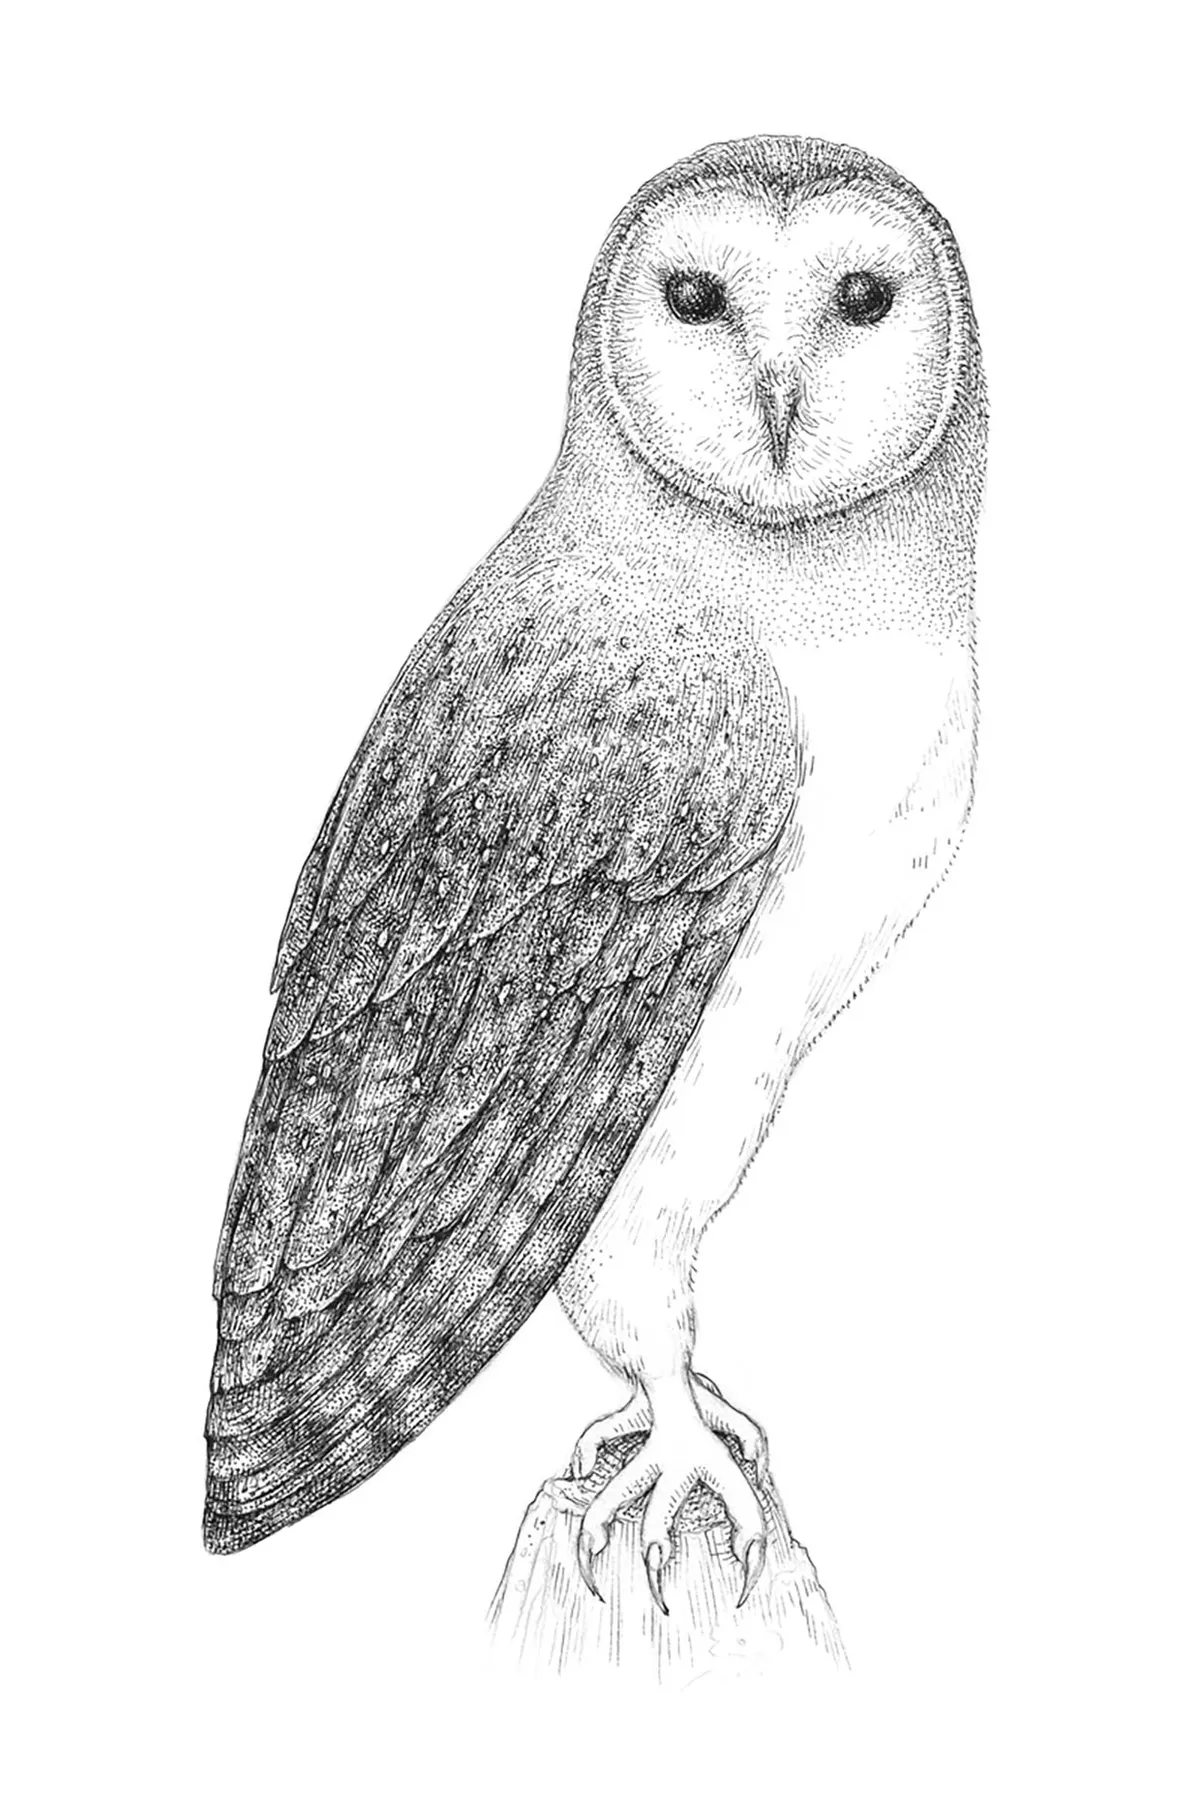 Halloween art projects – owl drawing